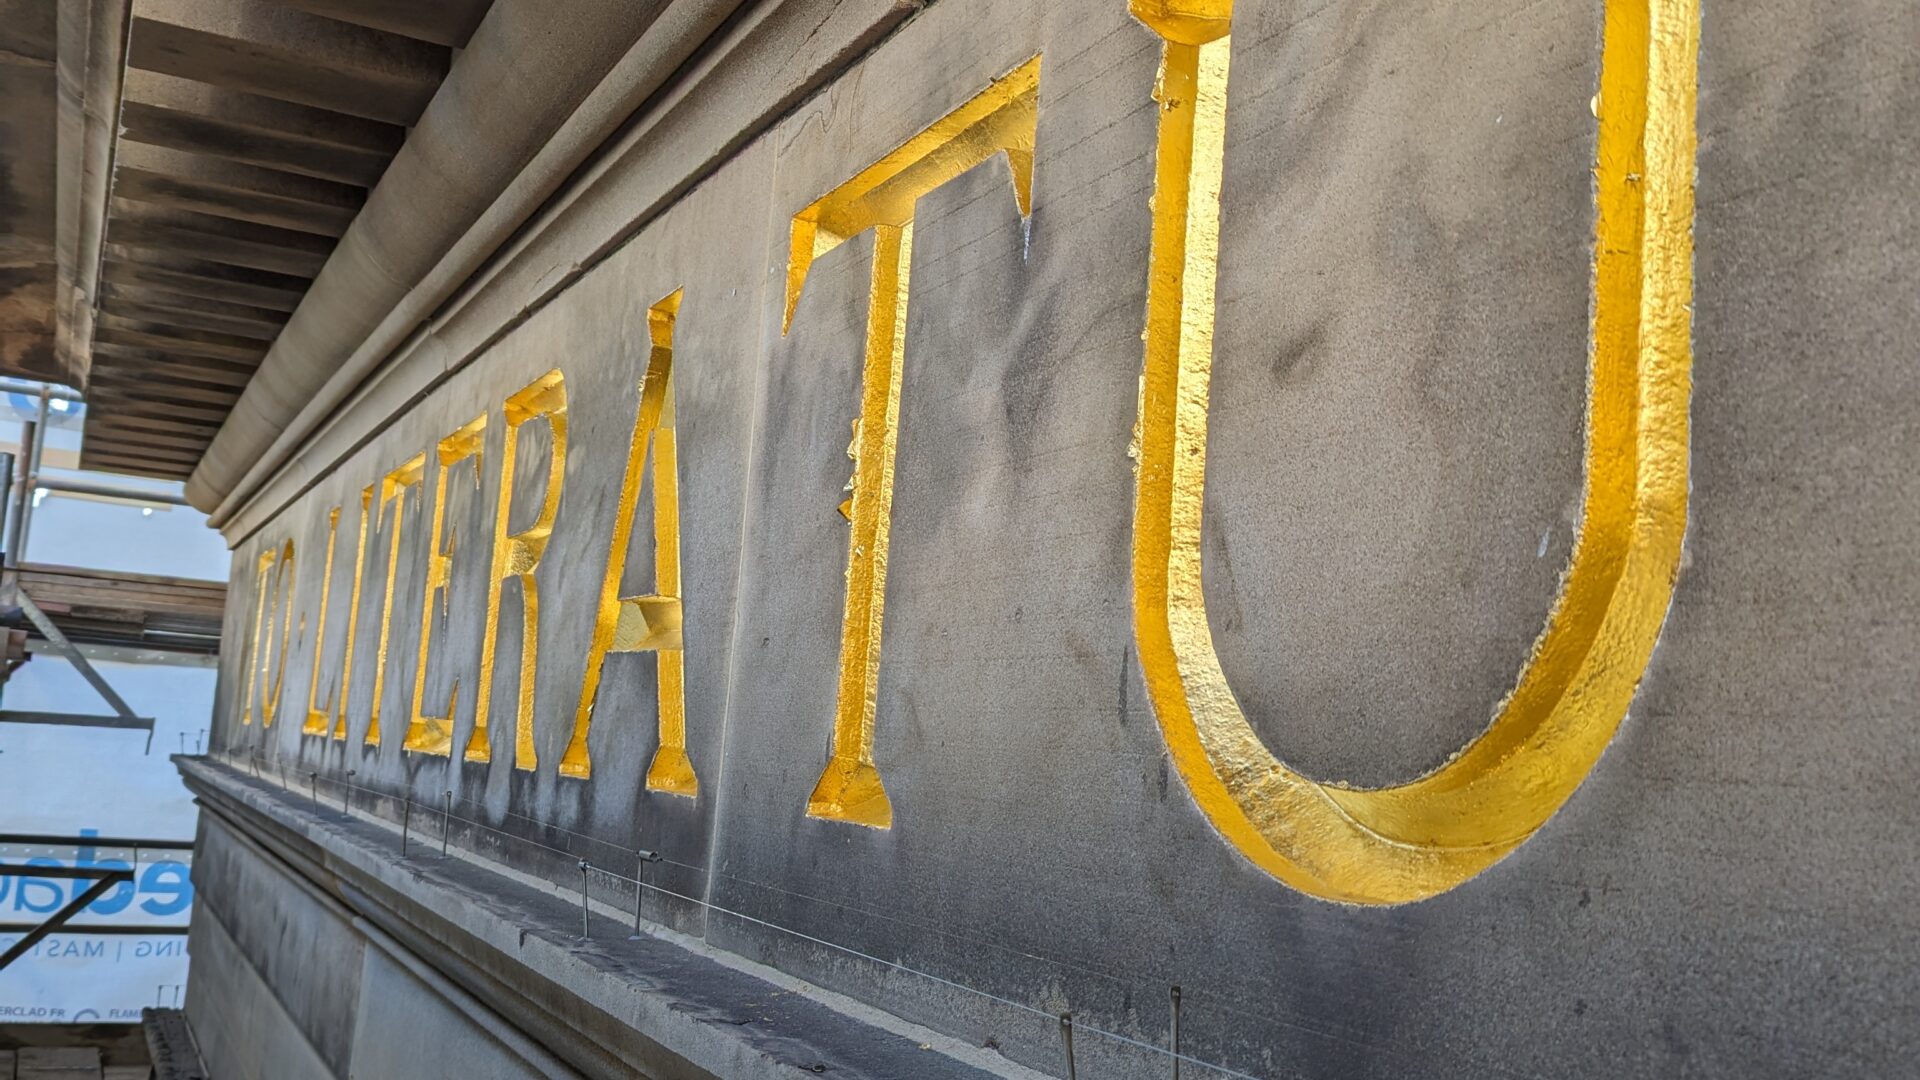 A close up of the gold lettering under the pediment.